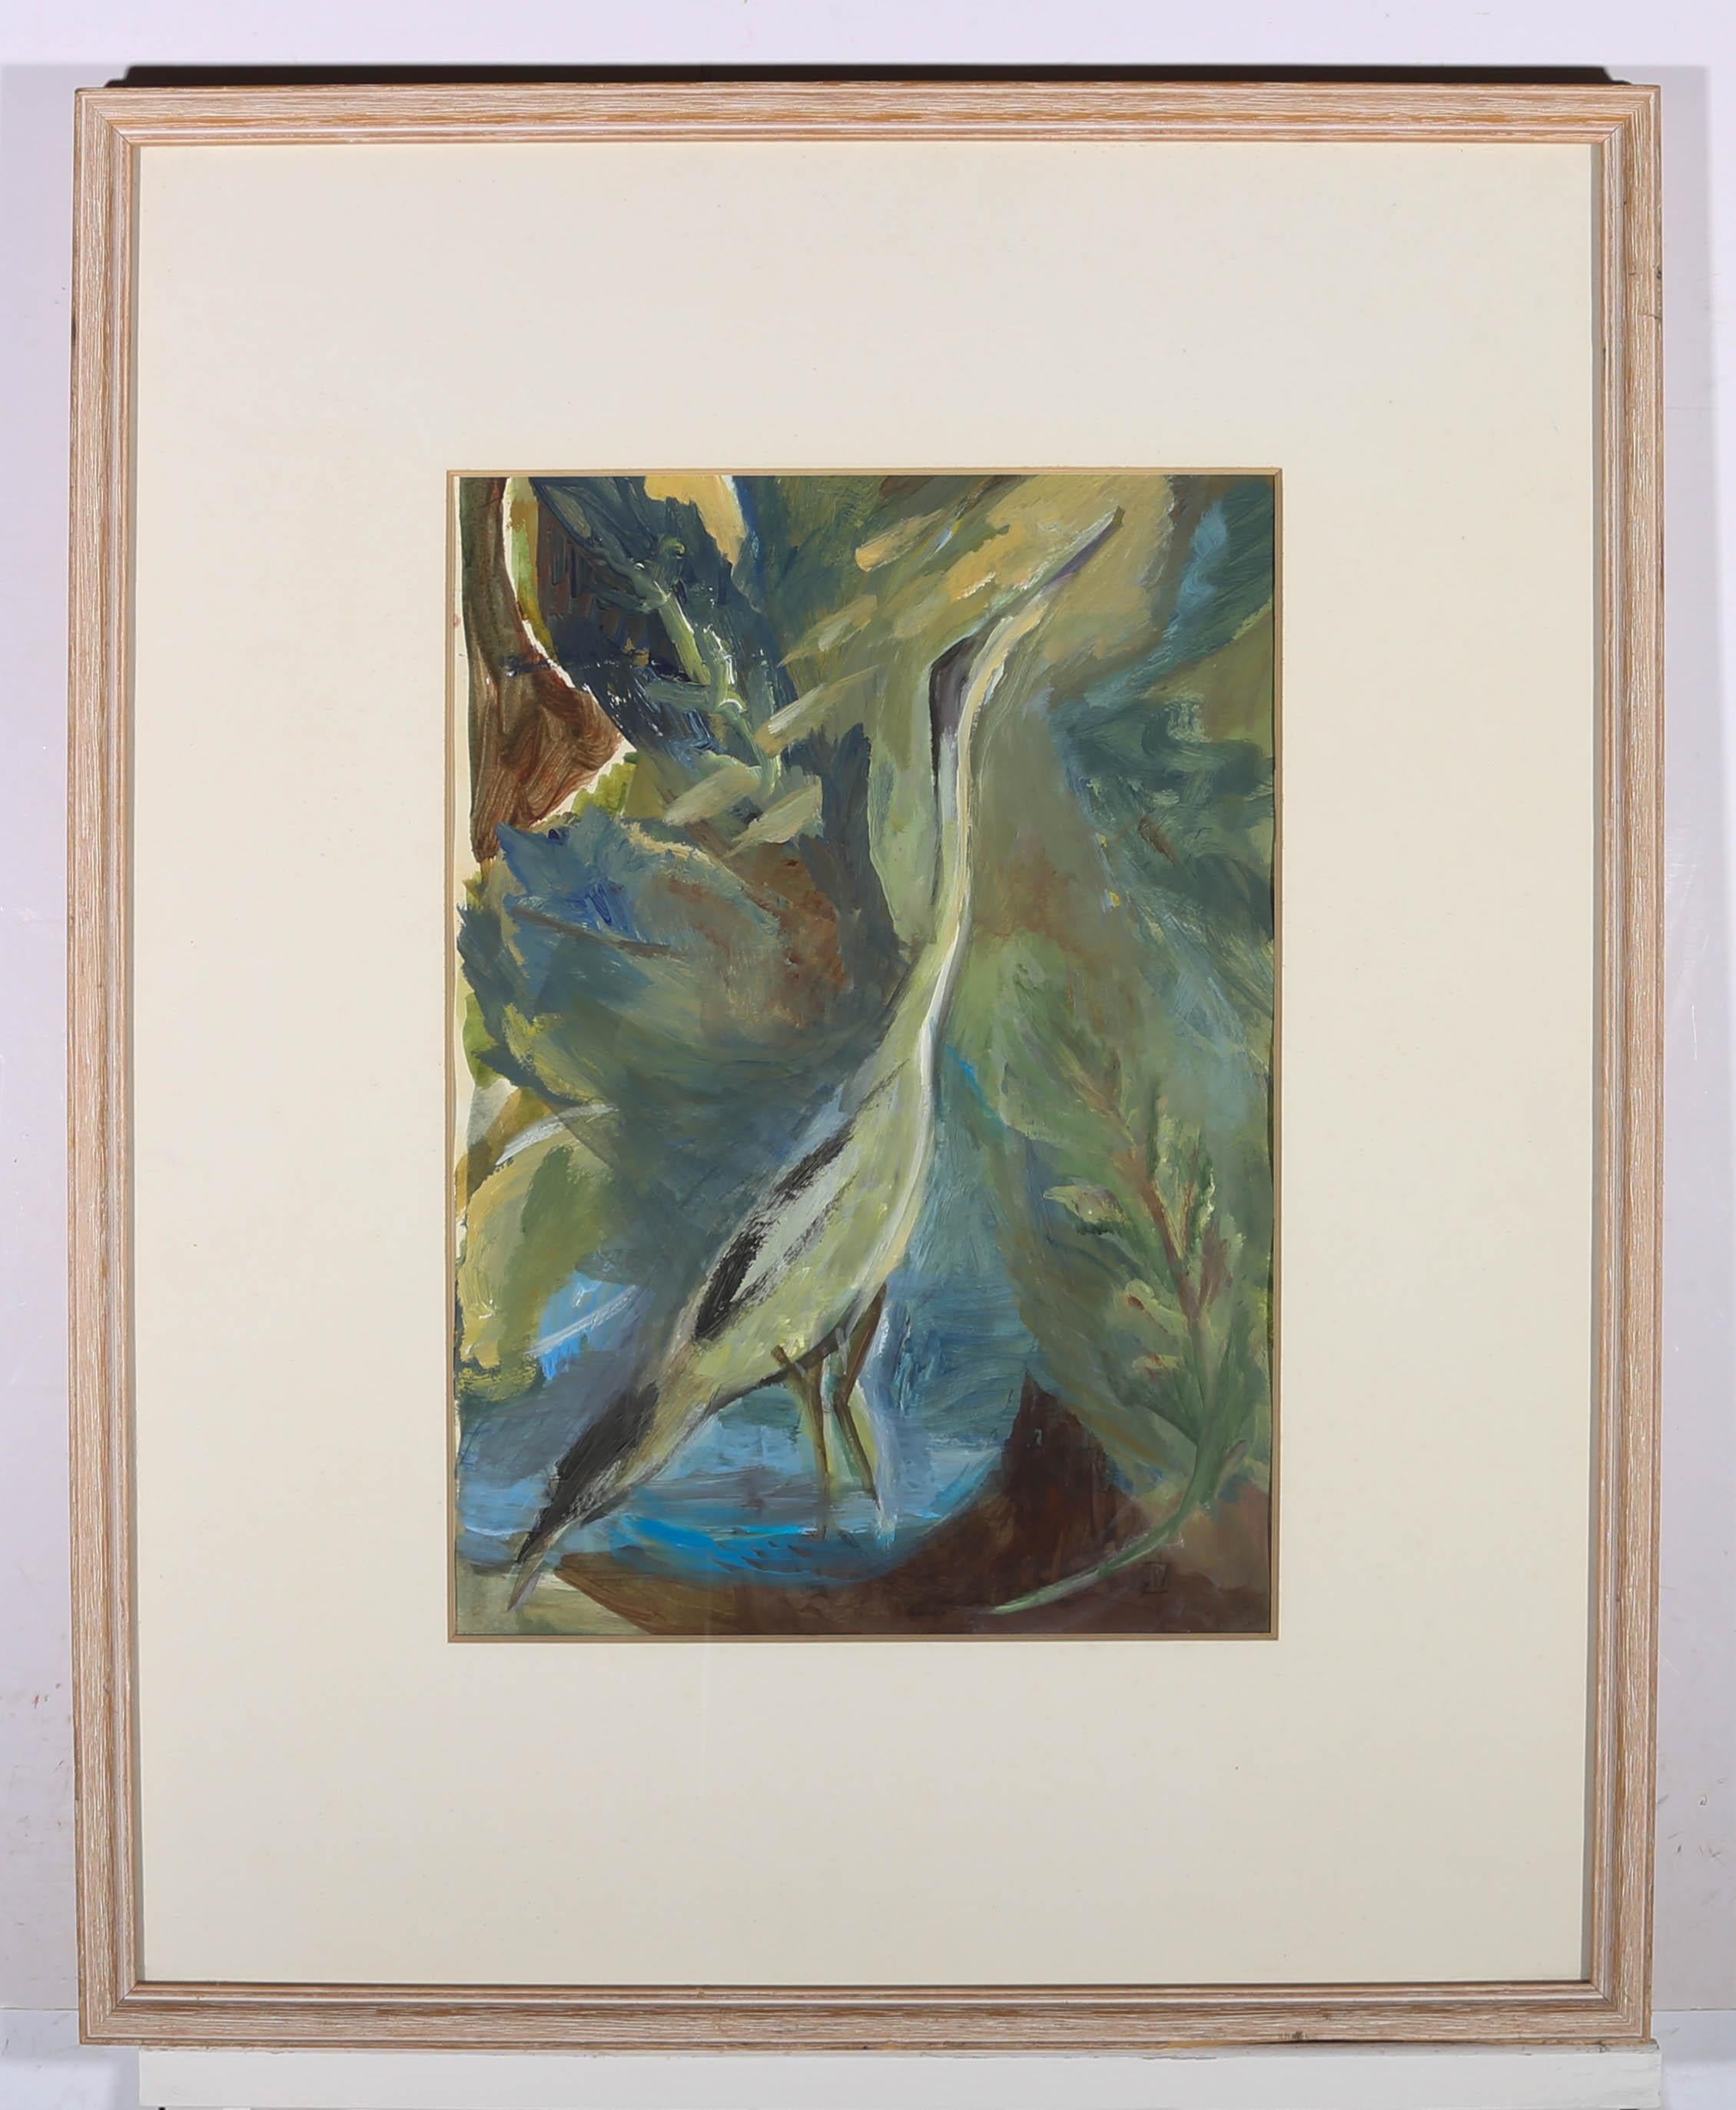 A beautifully lyrical depiction of a heron in oil. The bird is surrounded in swirling greenery and its elegant form stretches the full height of the painting. The artist has initialed to the lower right corner and the painting has been presented in